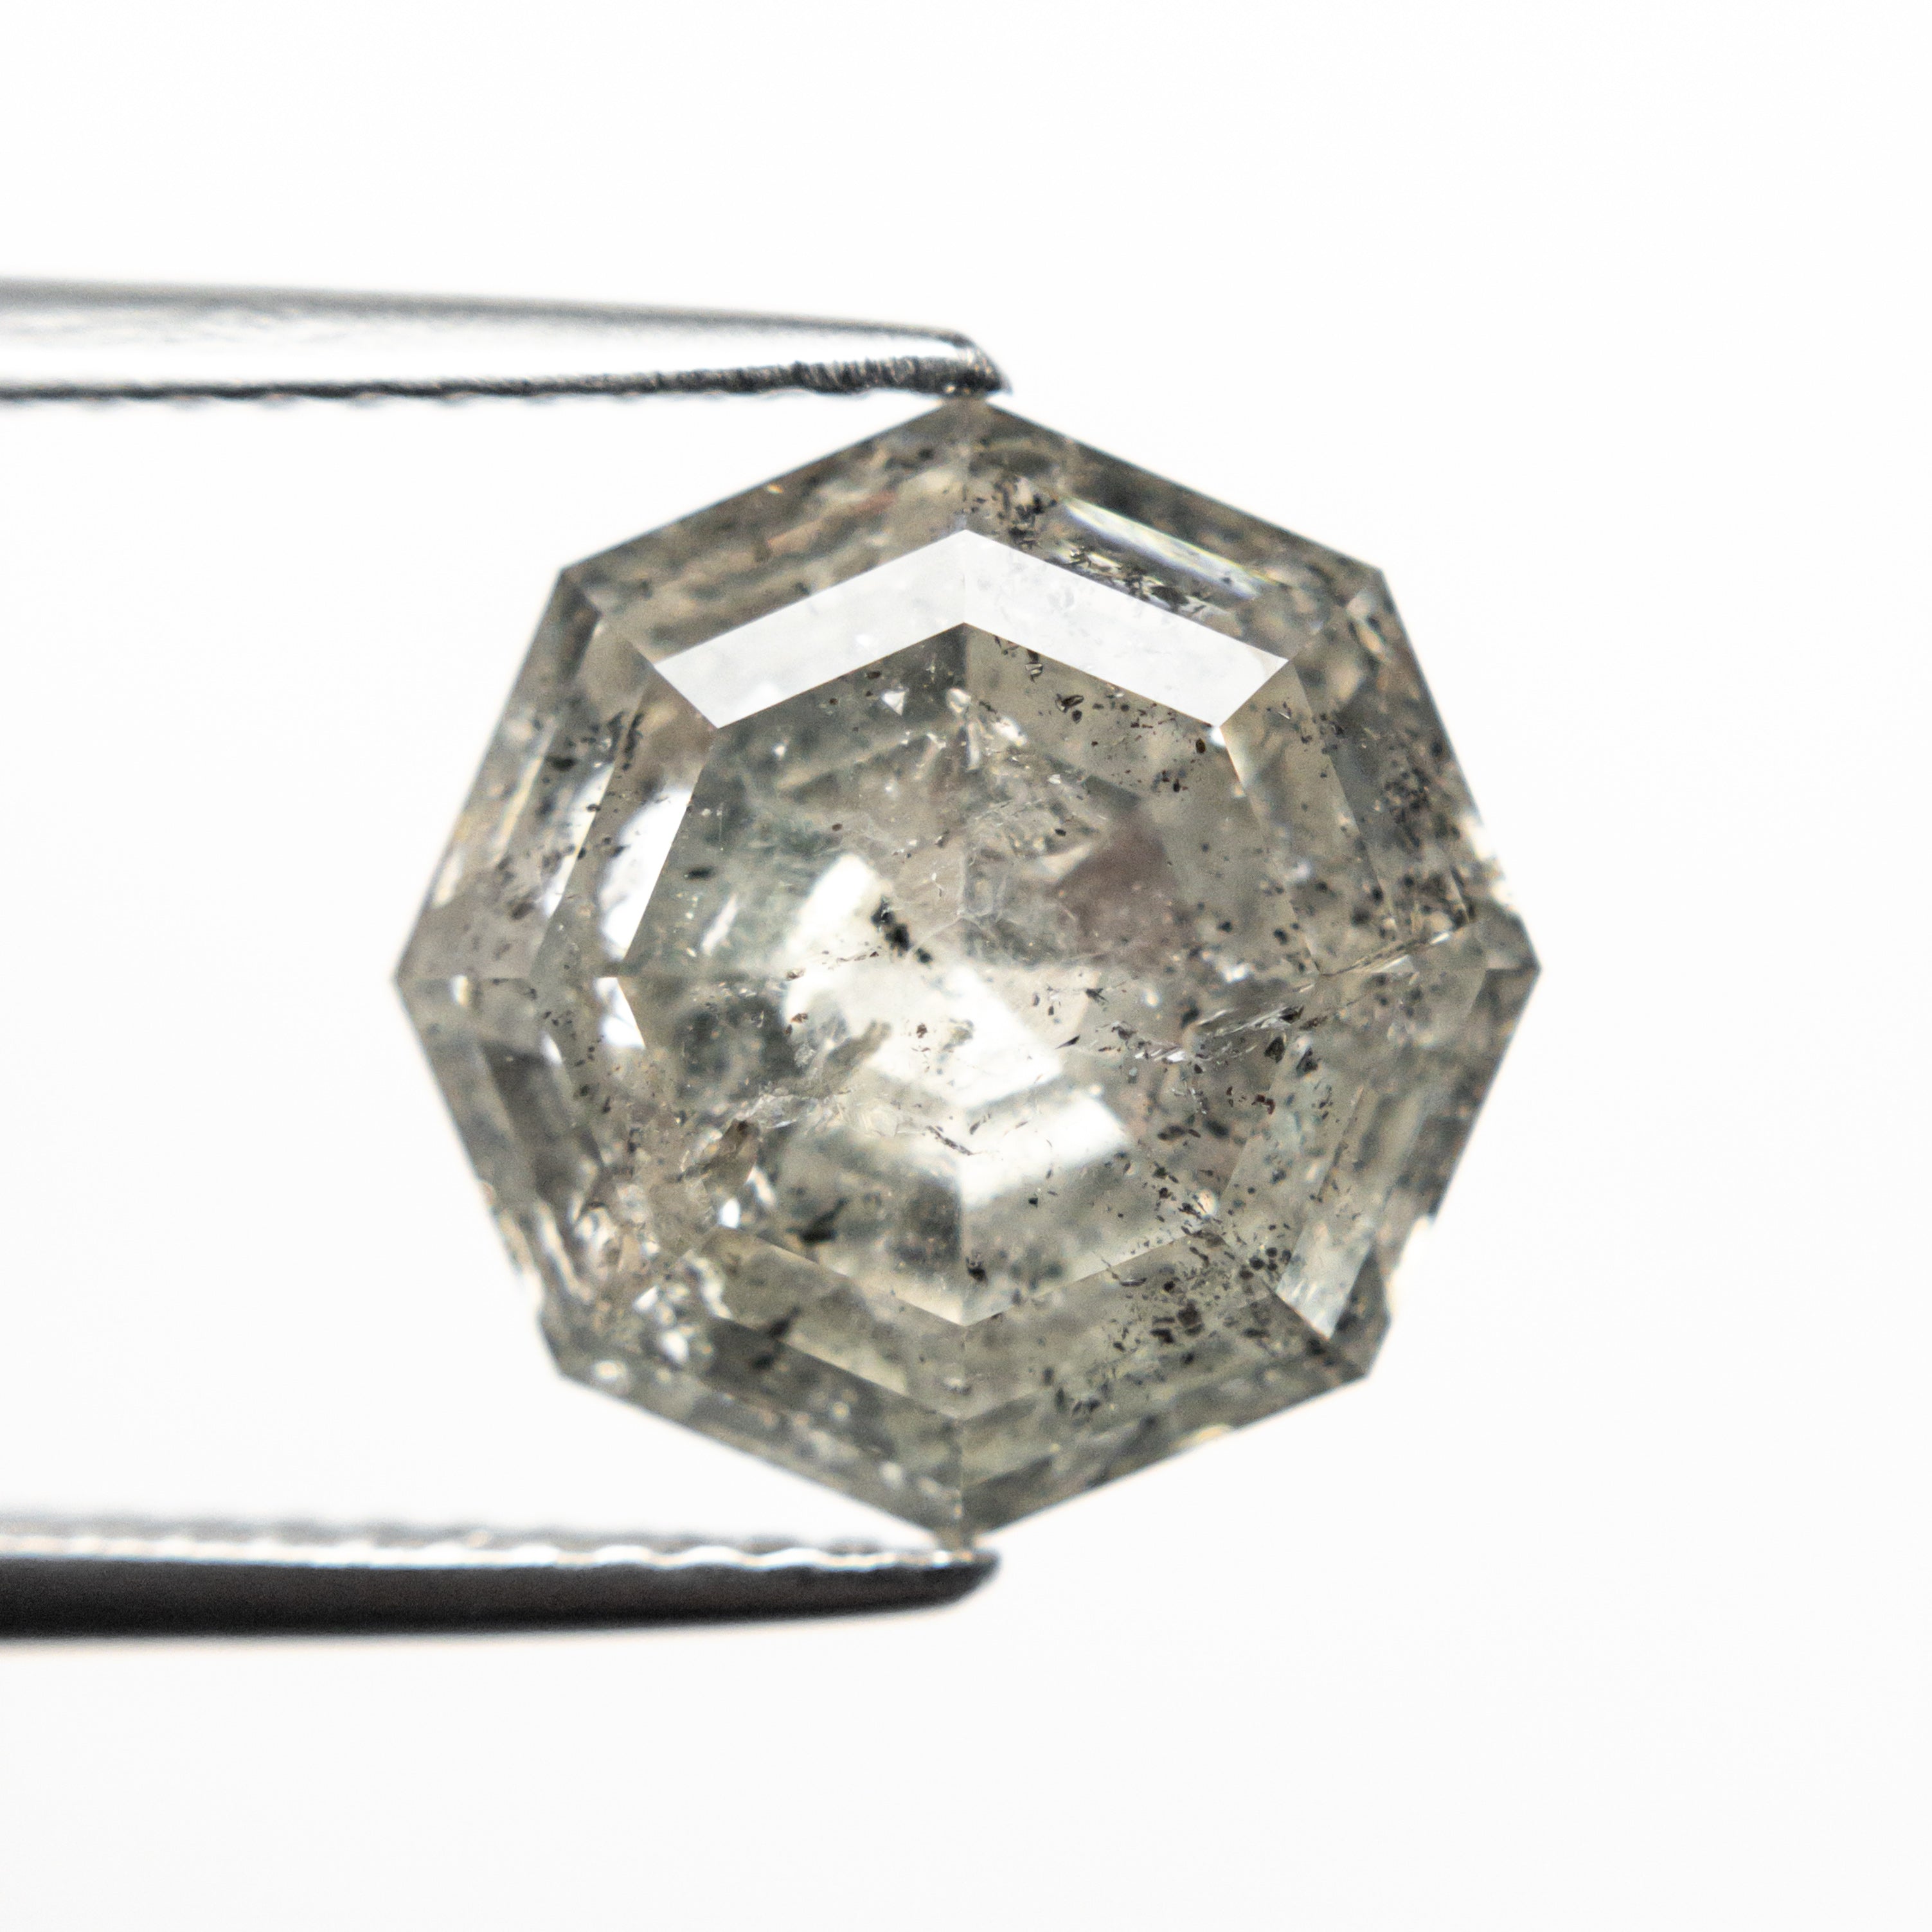 5.56ct 11.08x10.30x6.19mm Octagon Double Cut 20921-01